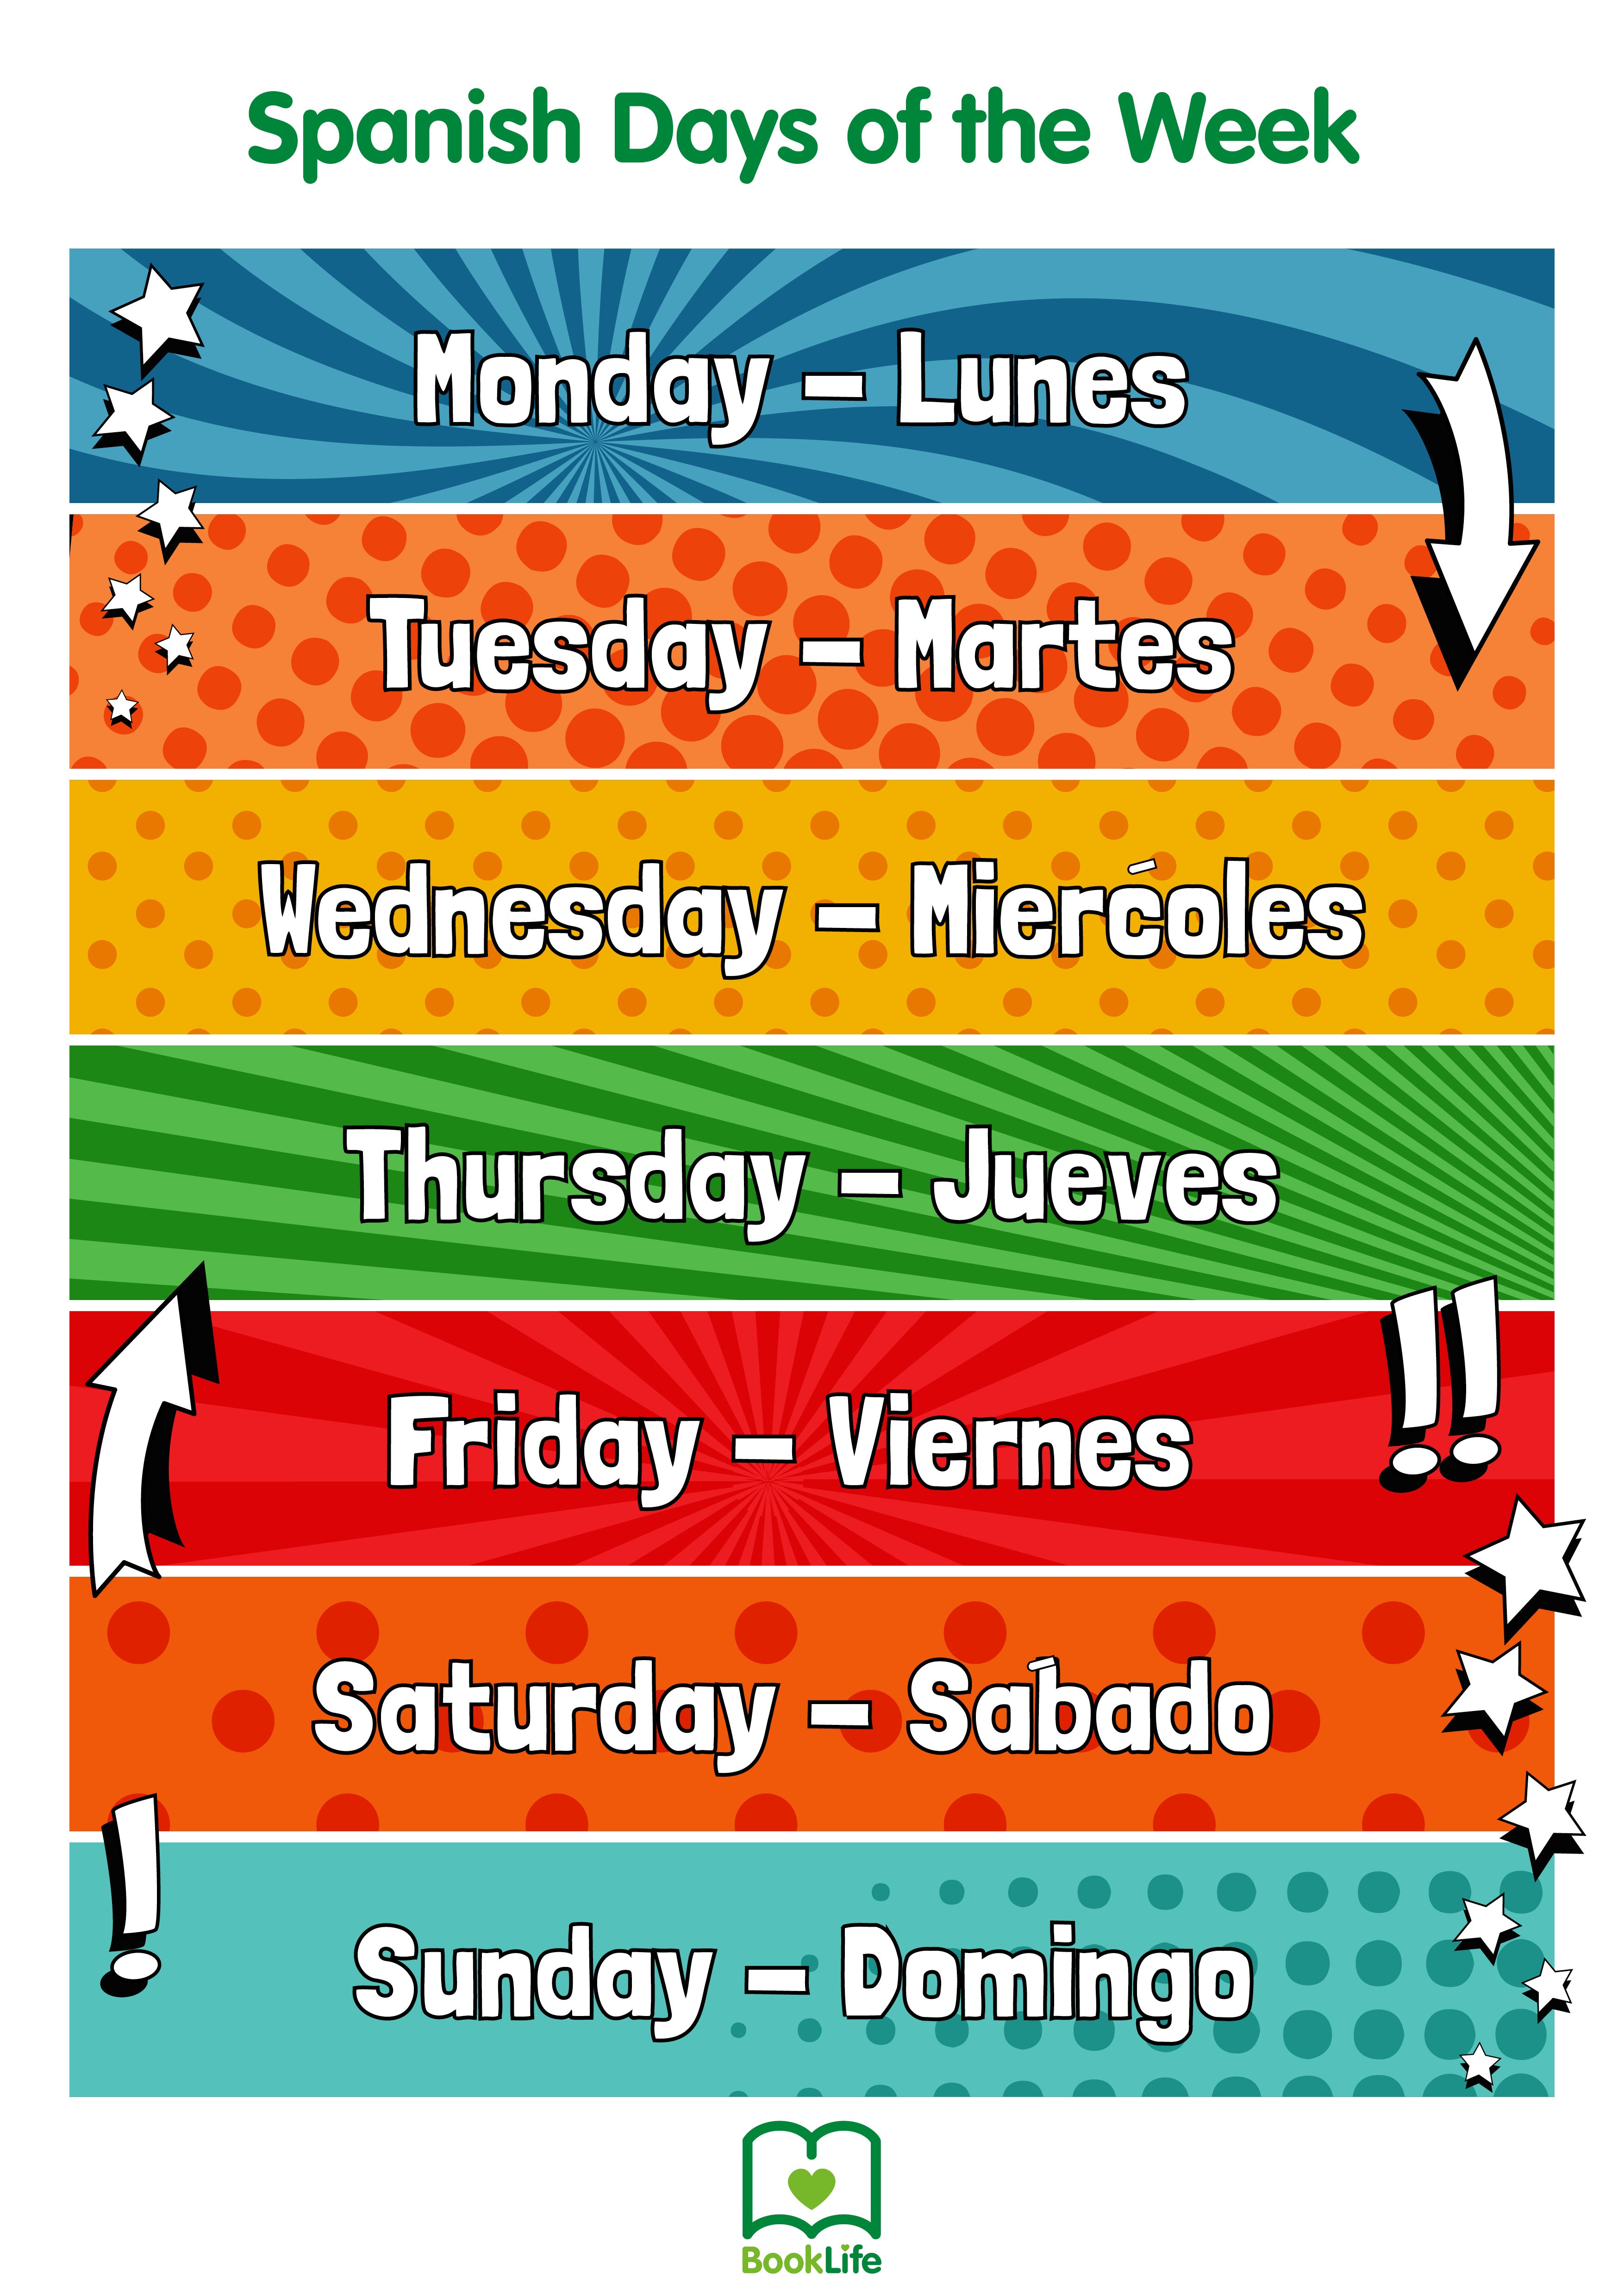 Free Spanish Days of the Week Poster by BookLife